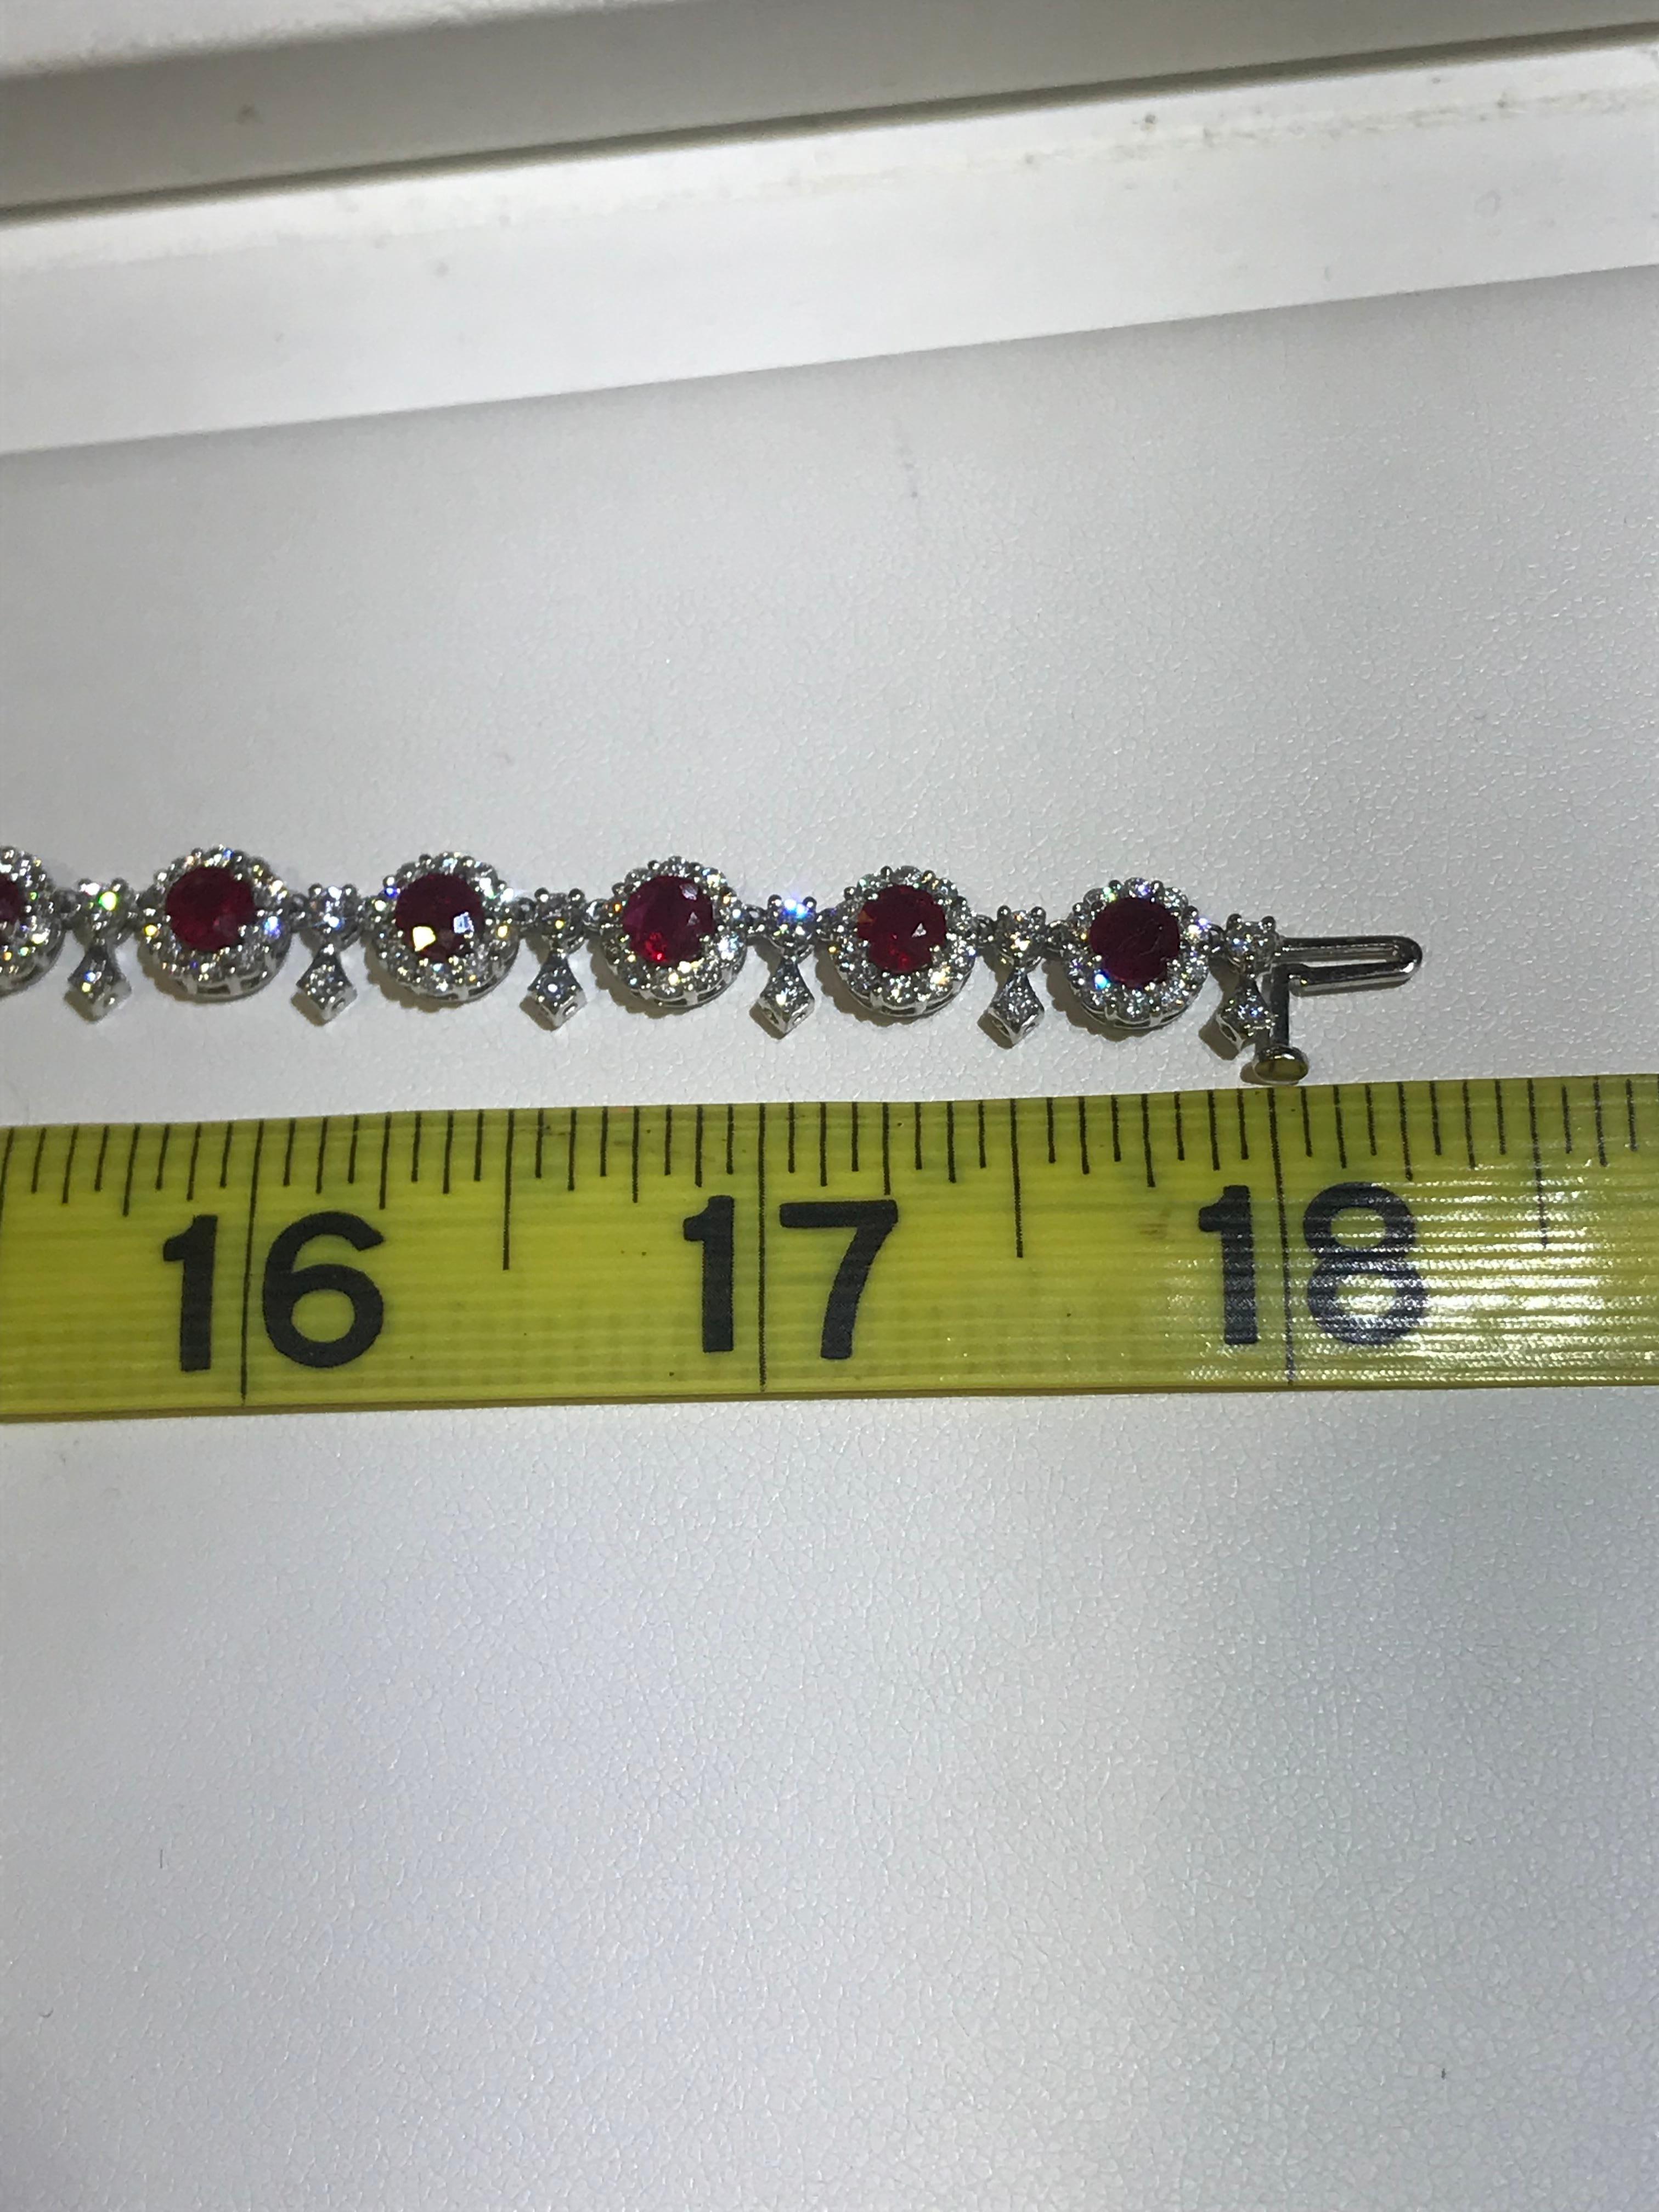 This lovely necklace measures 18 inches and is crafted from 18 karat white gold. It features beautiful, richly colored rubies and sparkling diamonds in the following numbers and measures. 

Rubies: 38 weighing 13.27 carats total weight 
Diamonds: